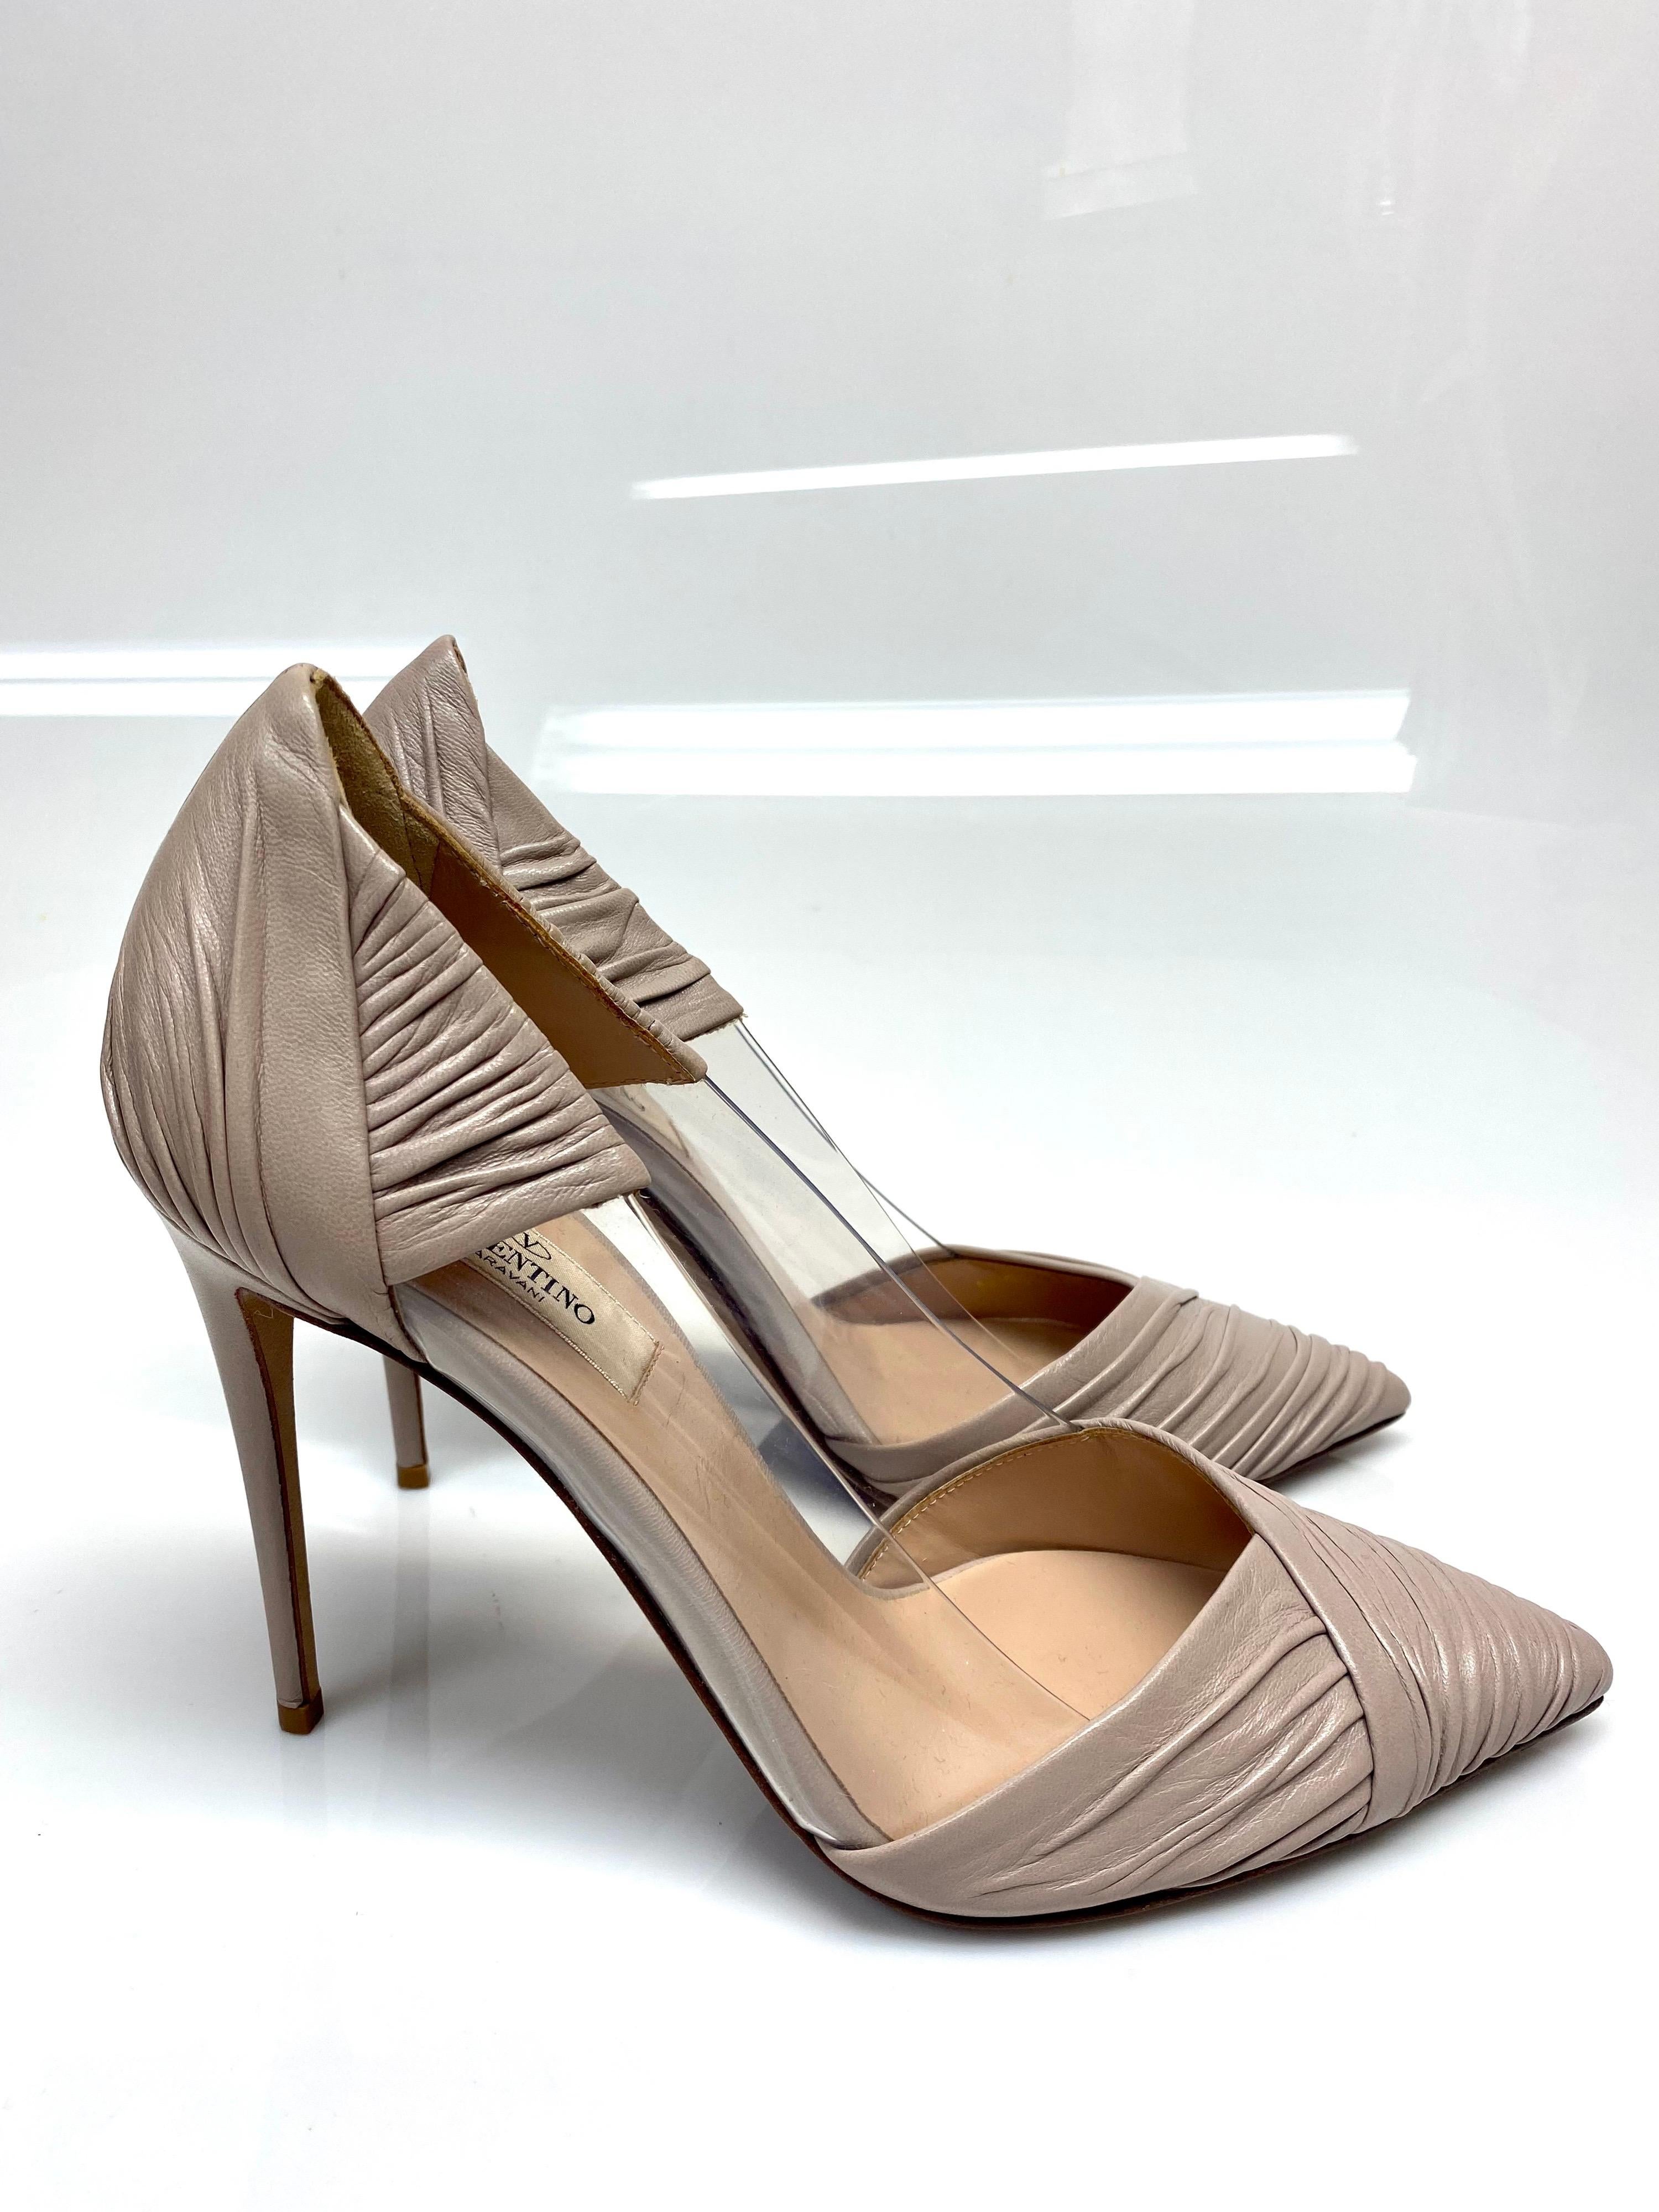 Brown Valentino Nude Ruched Leather Perspex Plastic Heels Pumps - Size 37.5